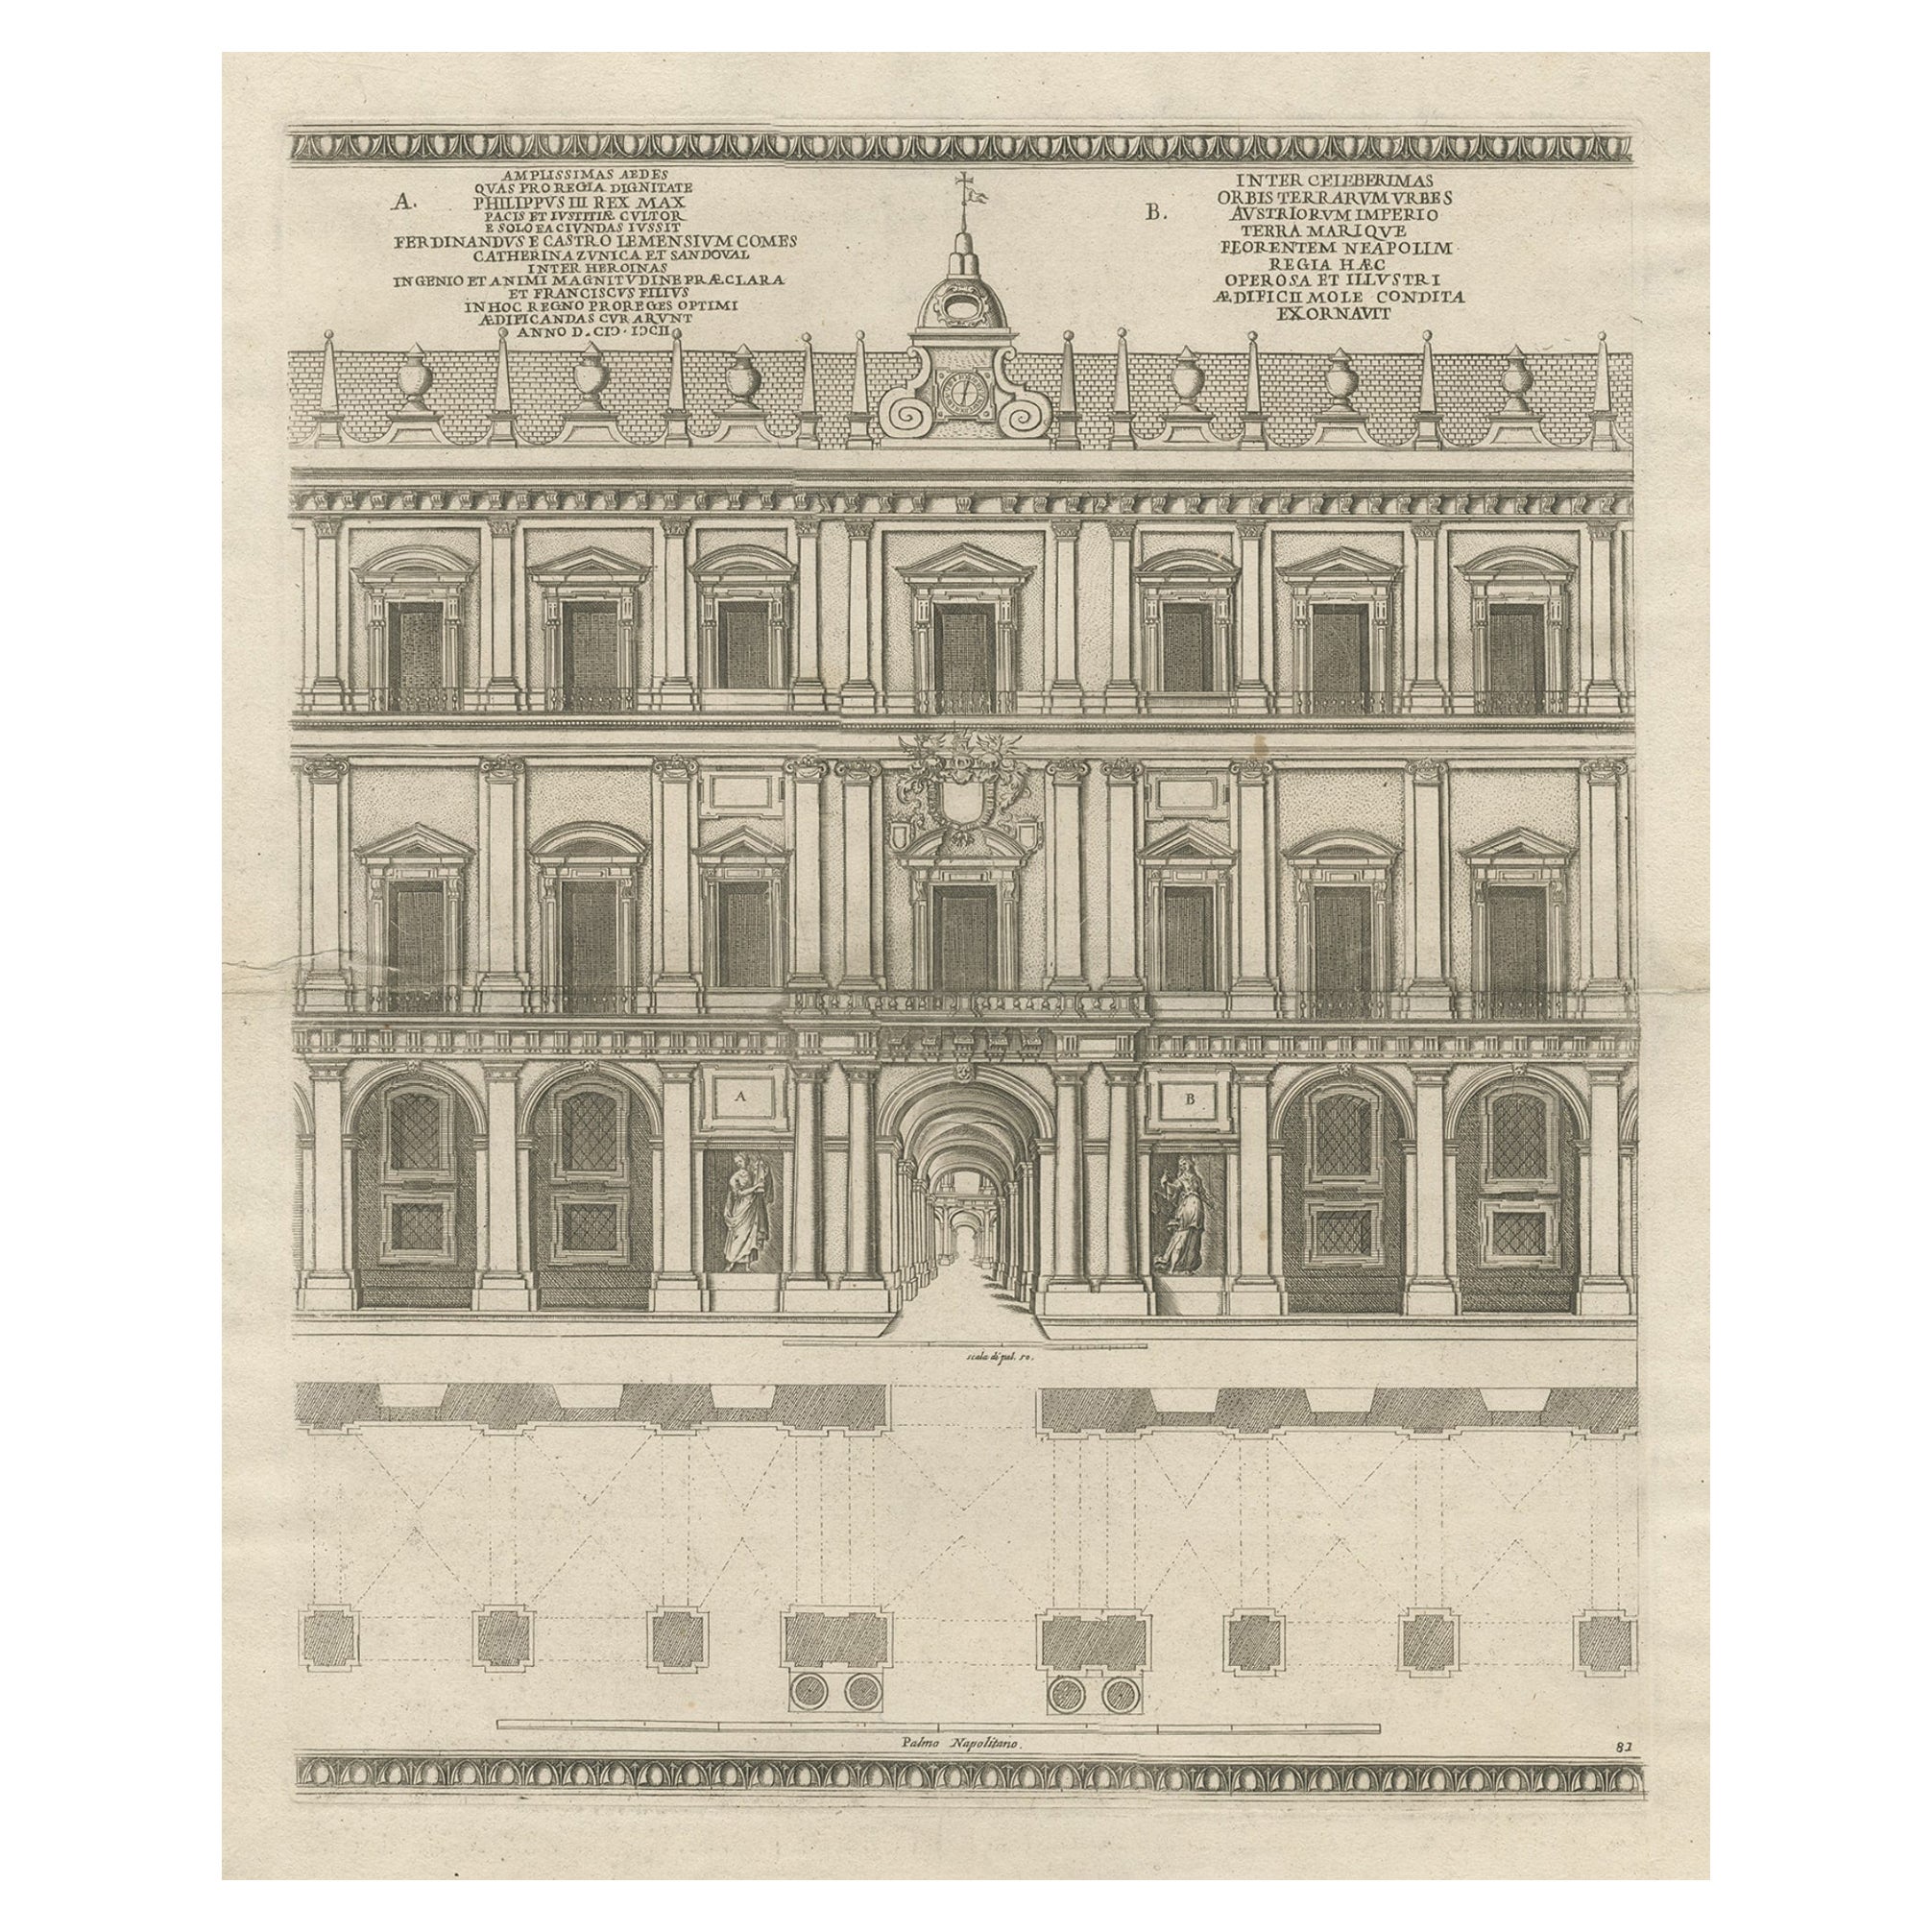 Antique Print of the Royal Palace of Naples in Italy, c.1760